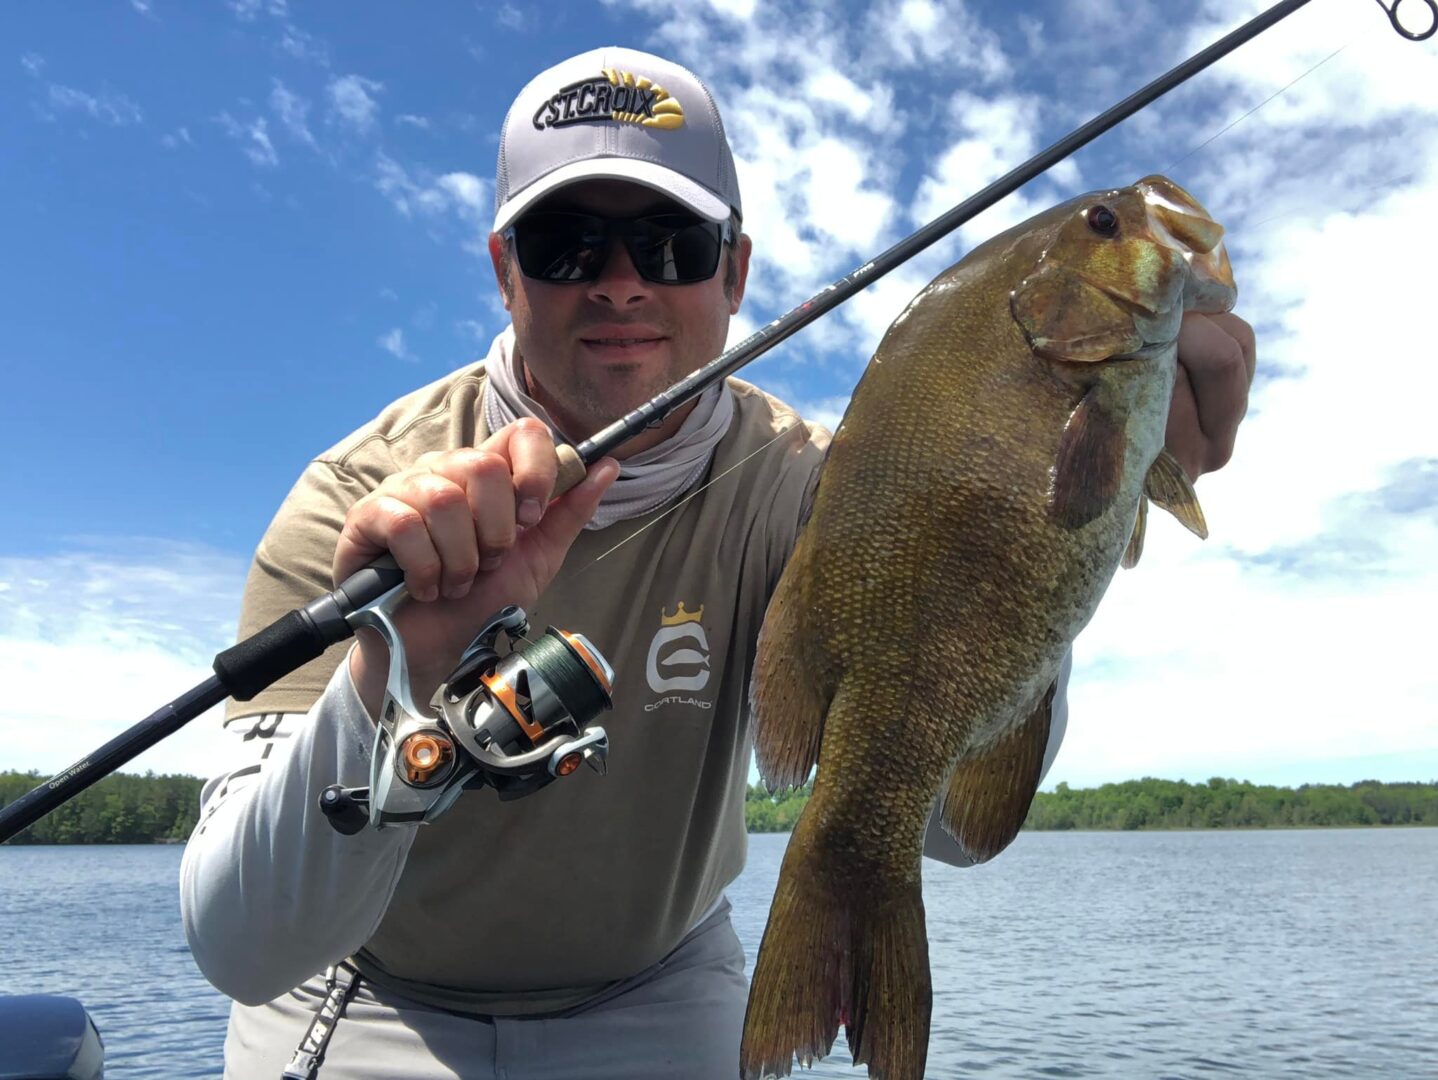 Your Kick'n Bass Fishing Report for August 17, 2022 